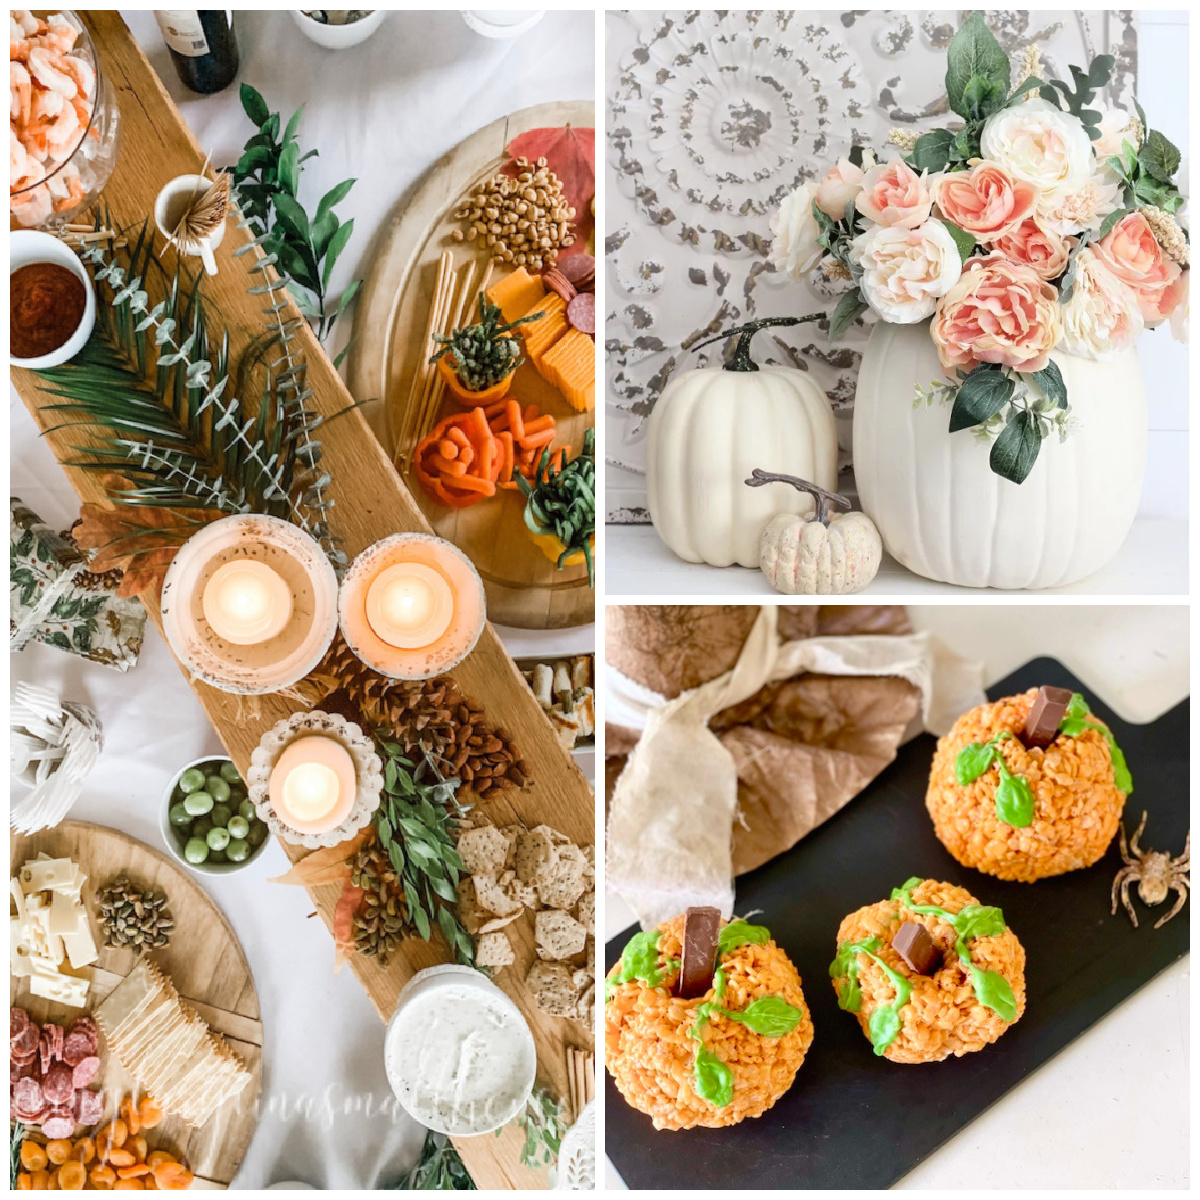 Tuesday Turn About #173 Celebrating Fall Holidays in Your Home